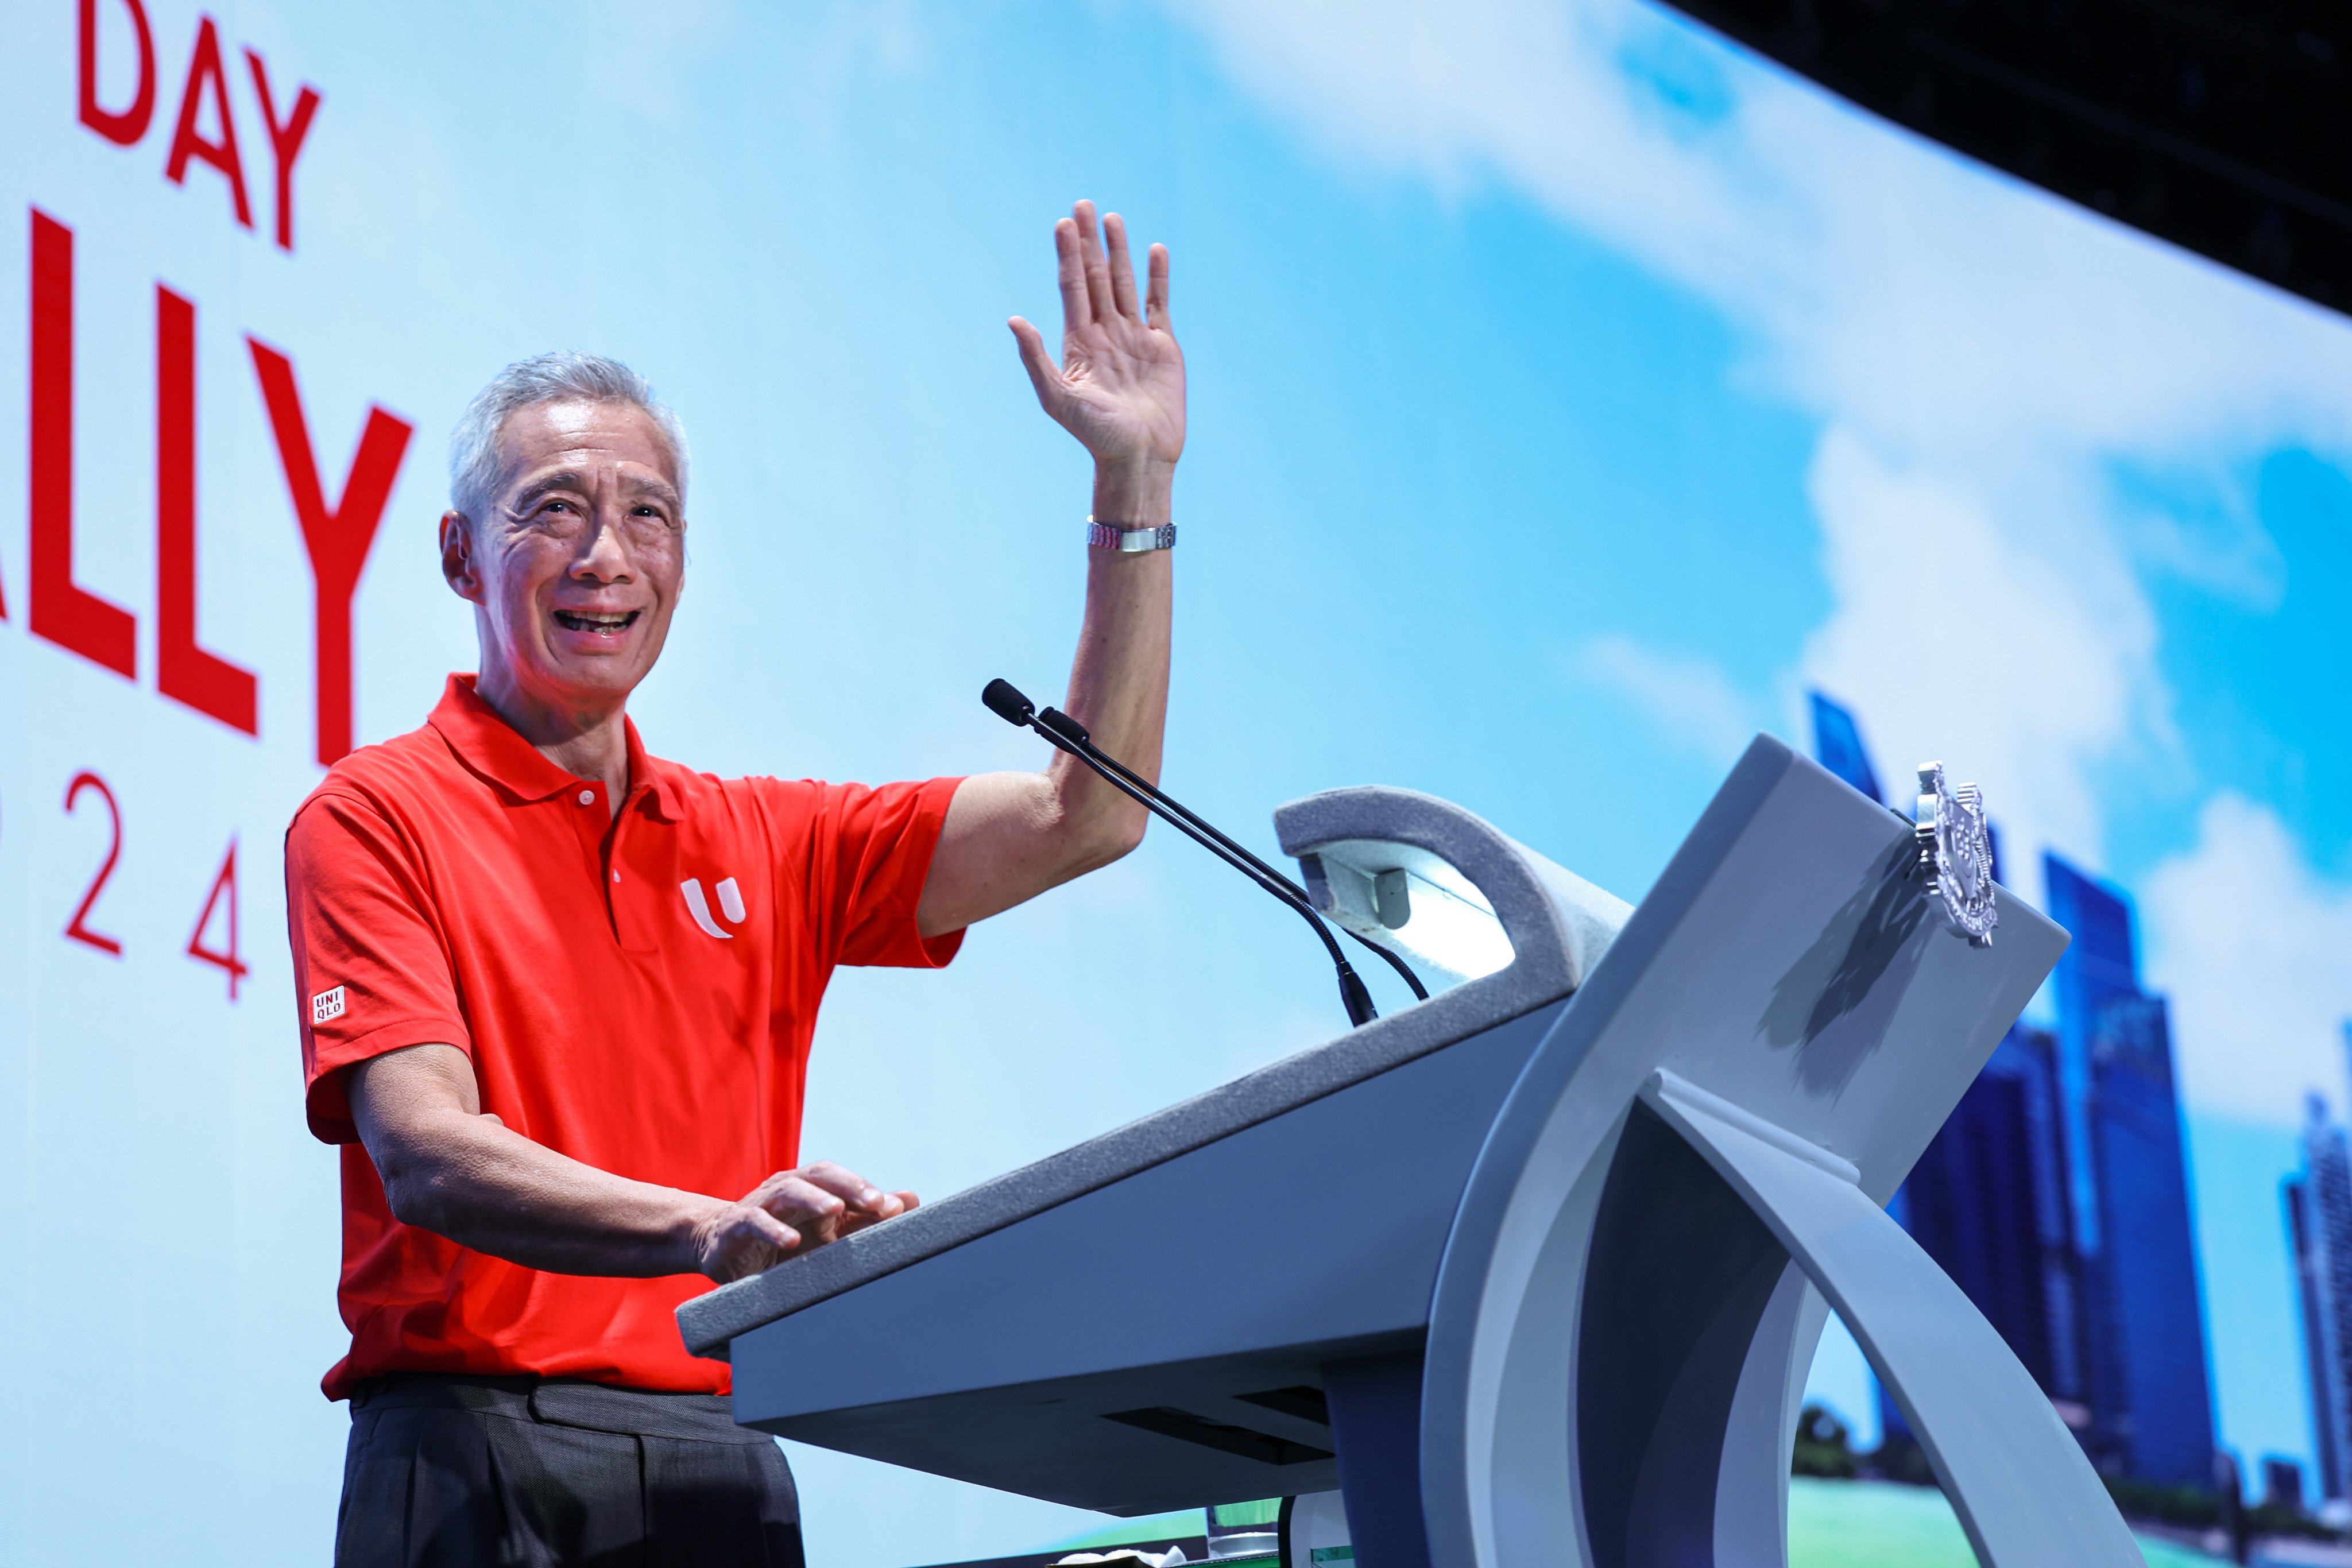 Prime Minister Lee Hsien Loong speaks at Singapore’s May Day rally. Photo: X/leehsienloong